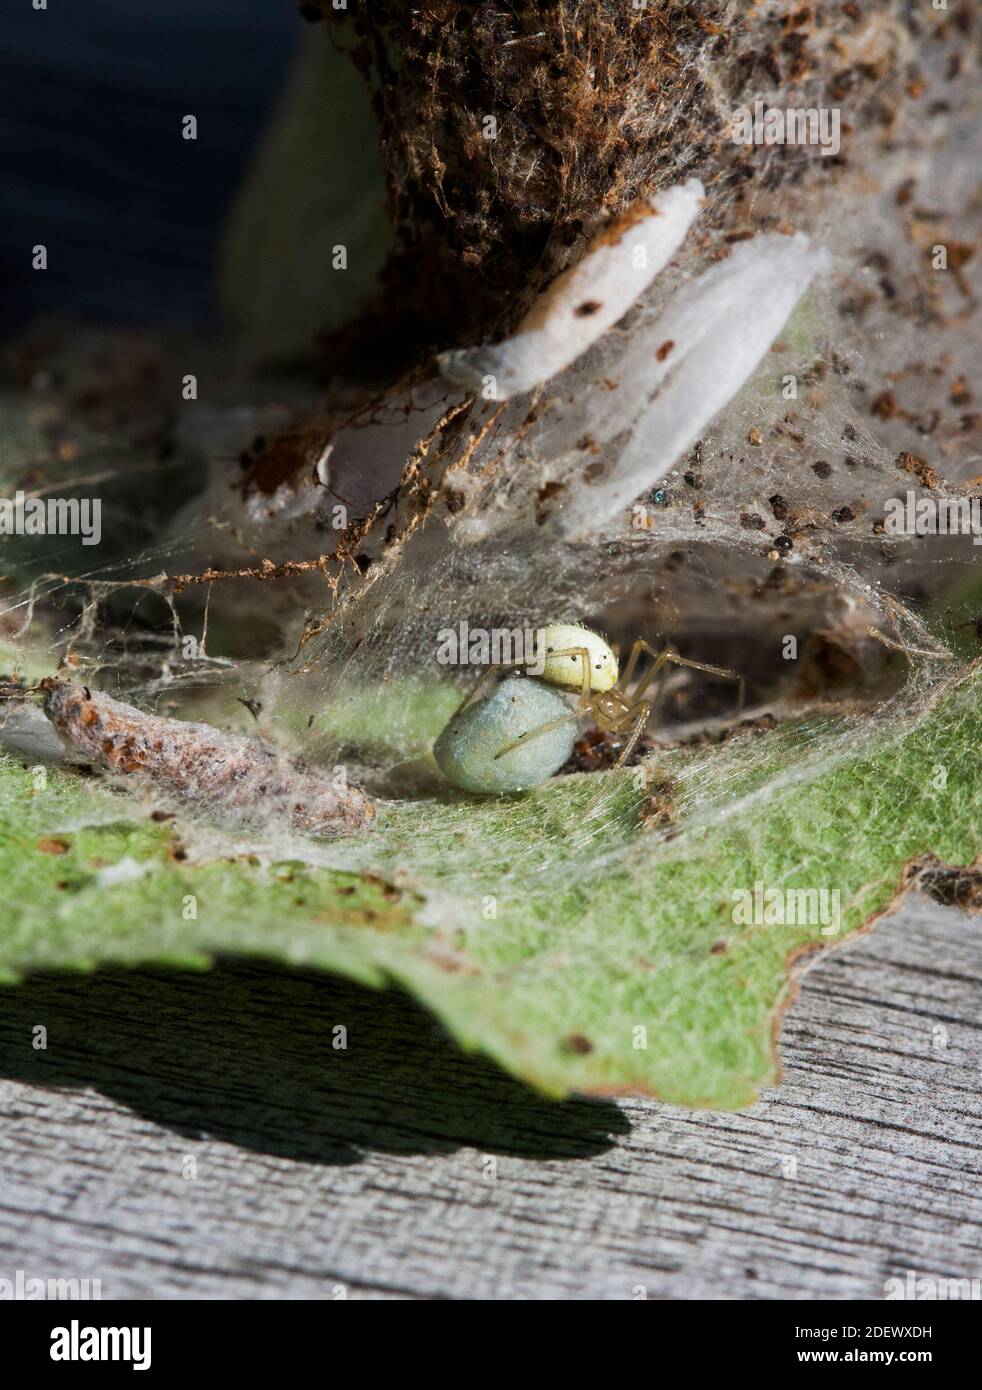 ENOPLOGNATHA OVATA in nest on its egg doposits sac Stock Photo